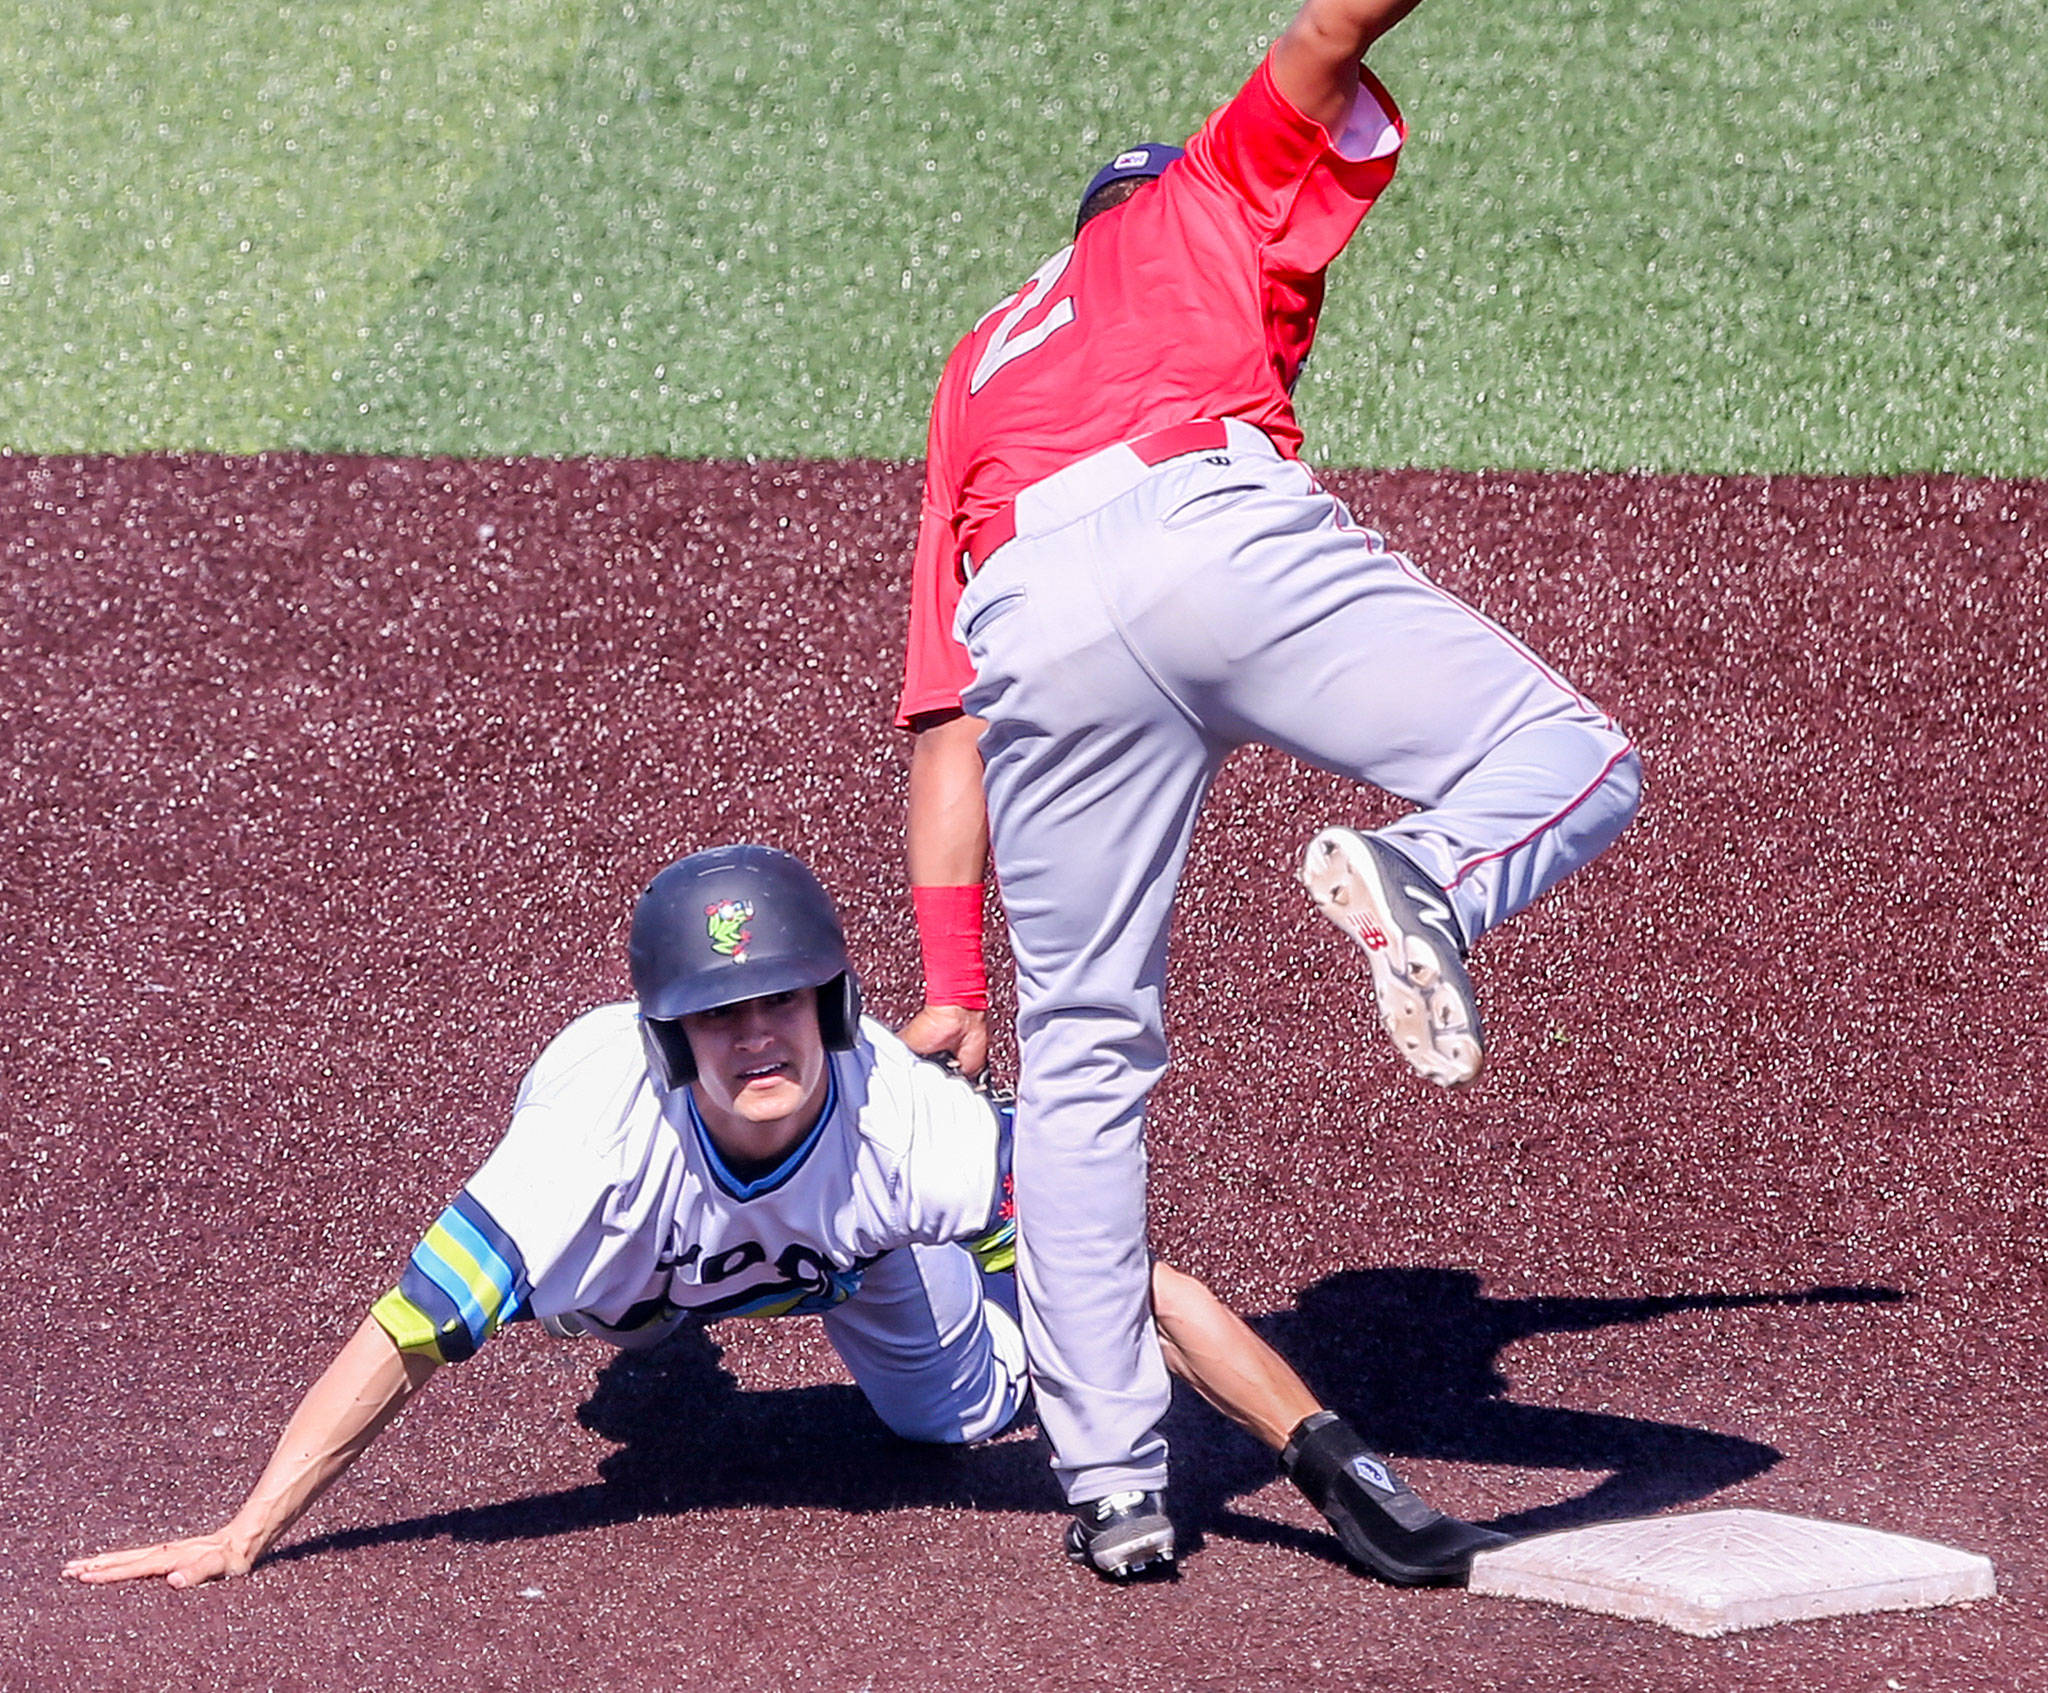 Everett’s Billy Cooke is tagged out by Spokane’s Christian Inoa on Sunday afternoon at Funko Field at Everett Memorial Stadium. (Kevin Clark / The Herald)